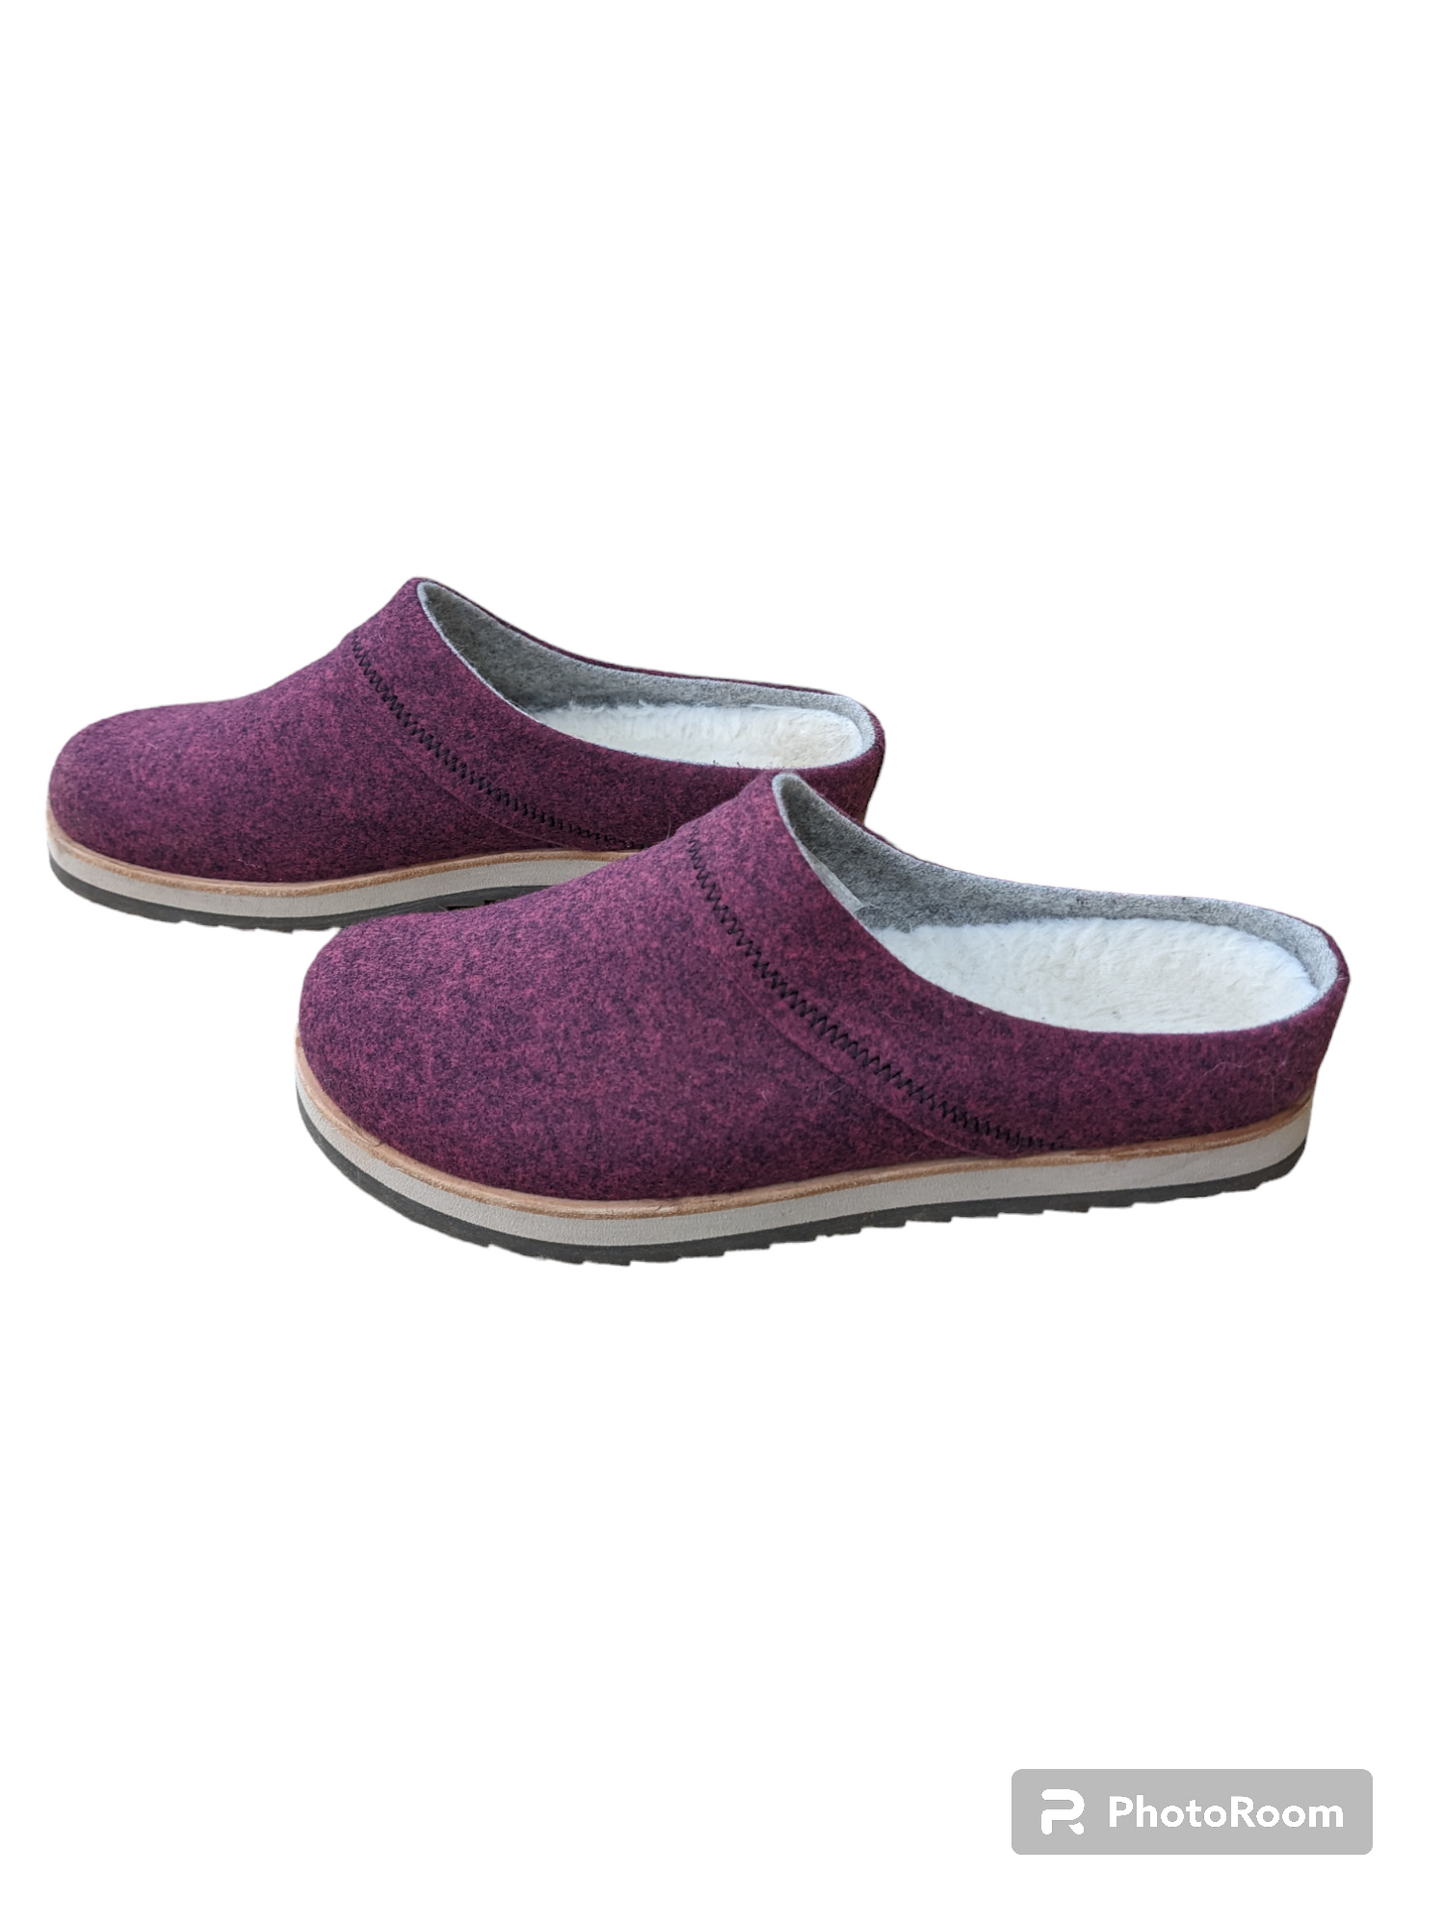 Shoes Flats Mule And Slide By Merrell  Size: 8.5